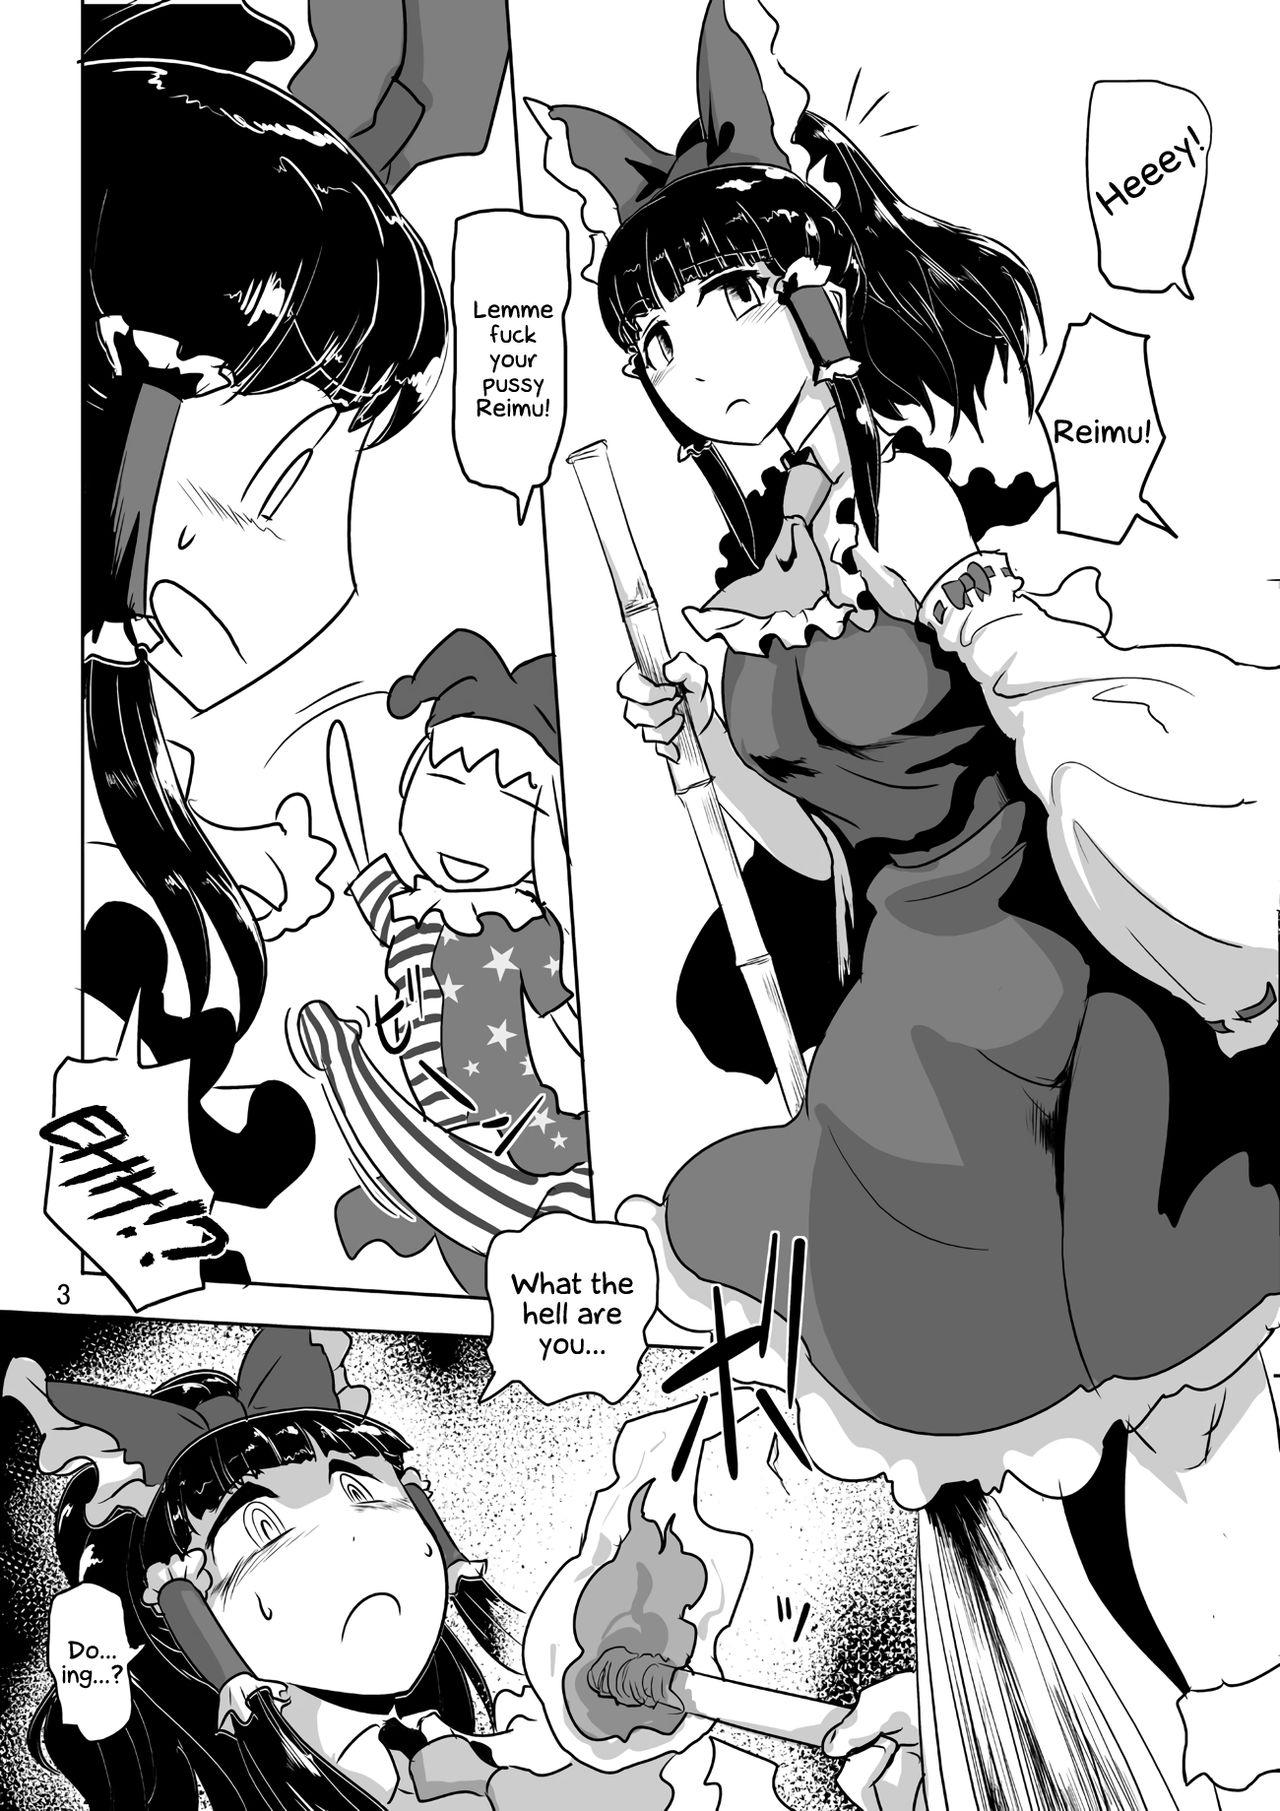 Gayhardcore Jigoku no Tanetsuke Yousei | The Impregnating Fairy From Hell! - Touhou project Linda - Page 4